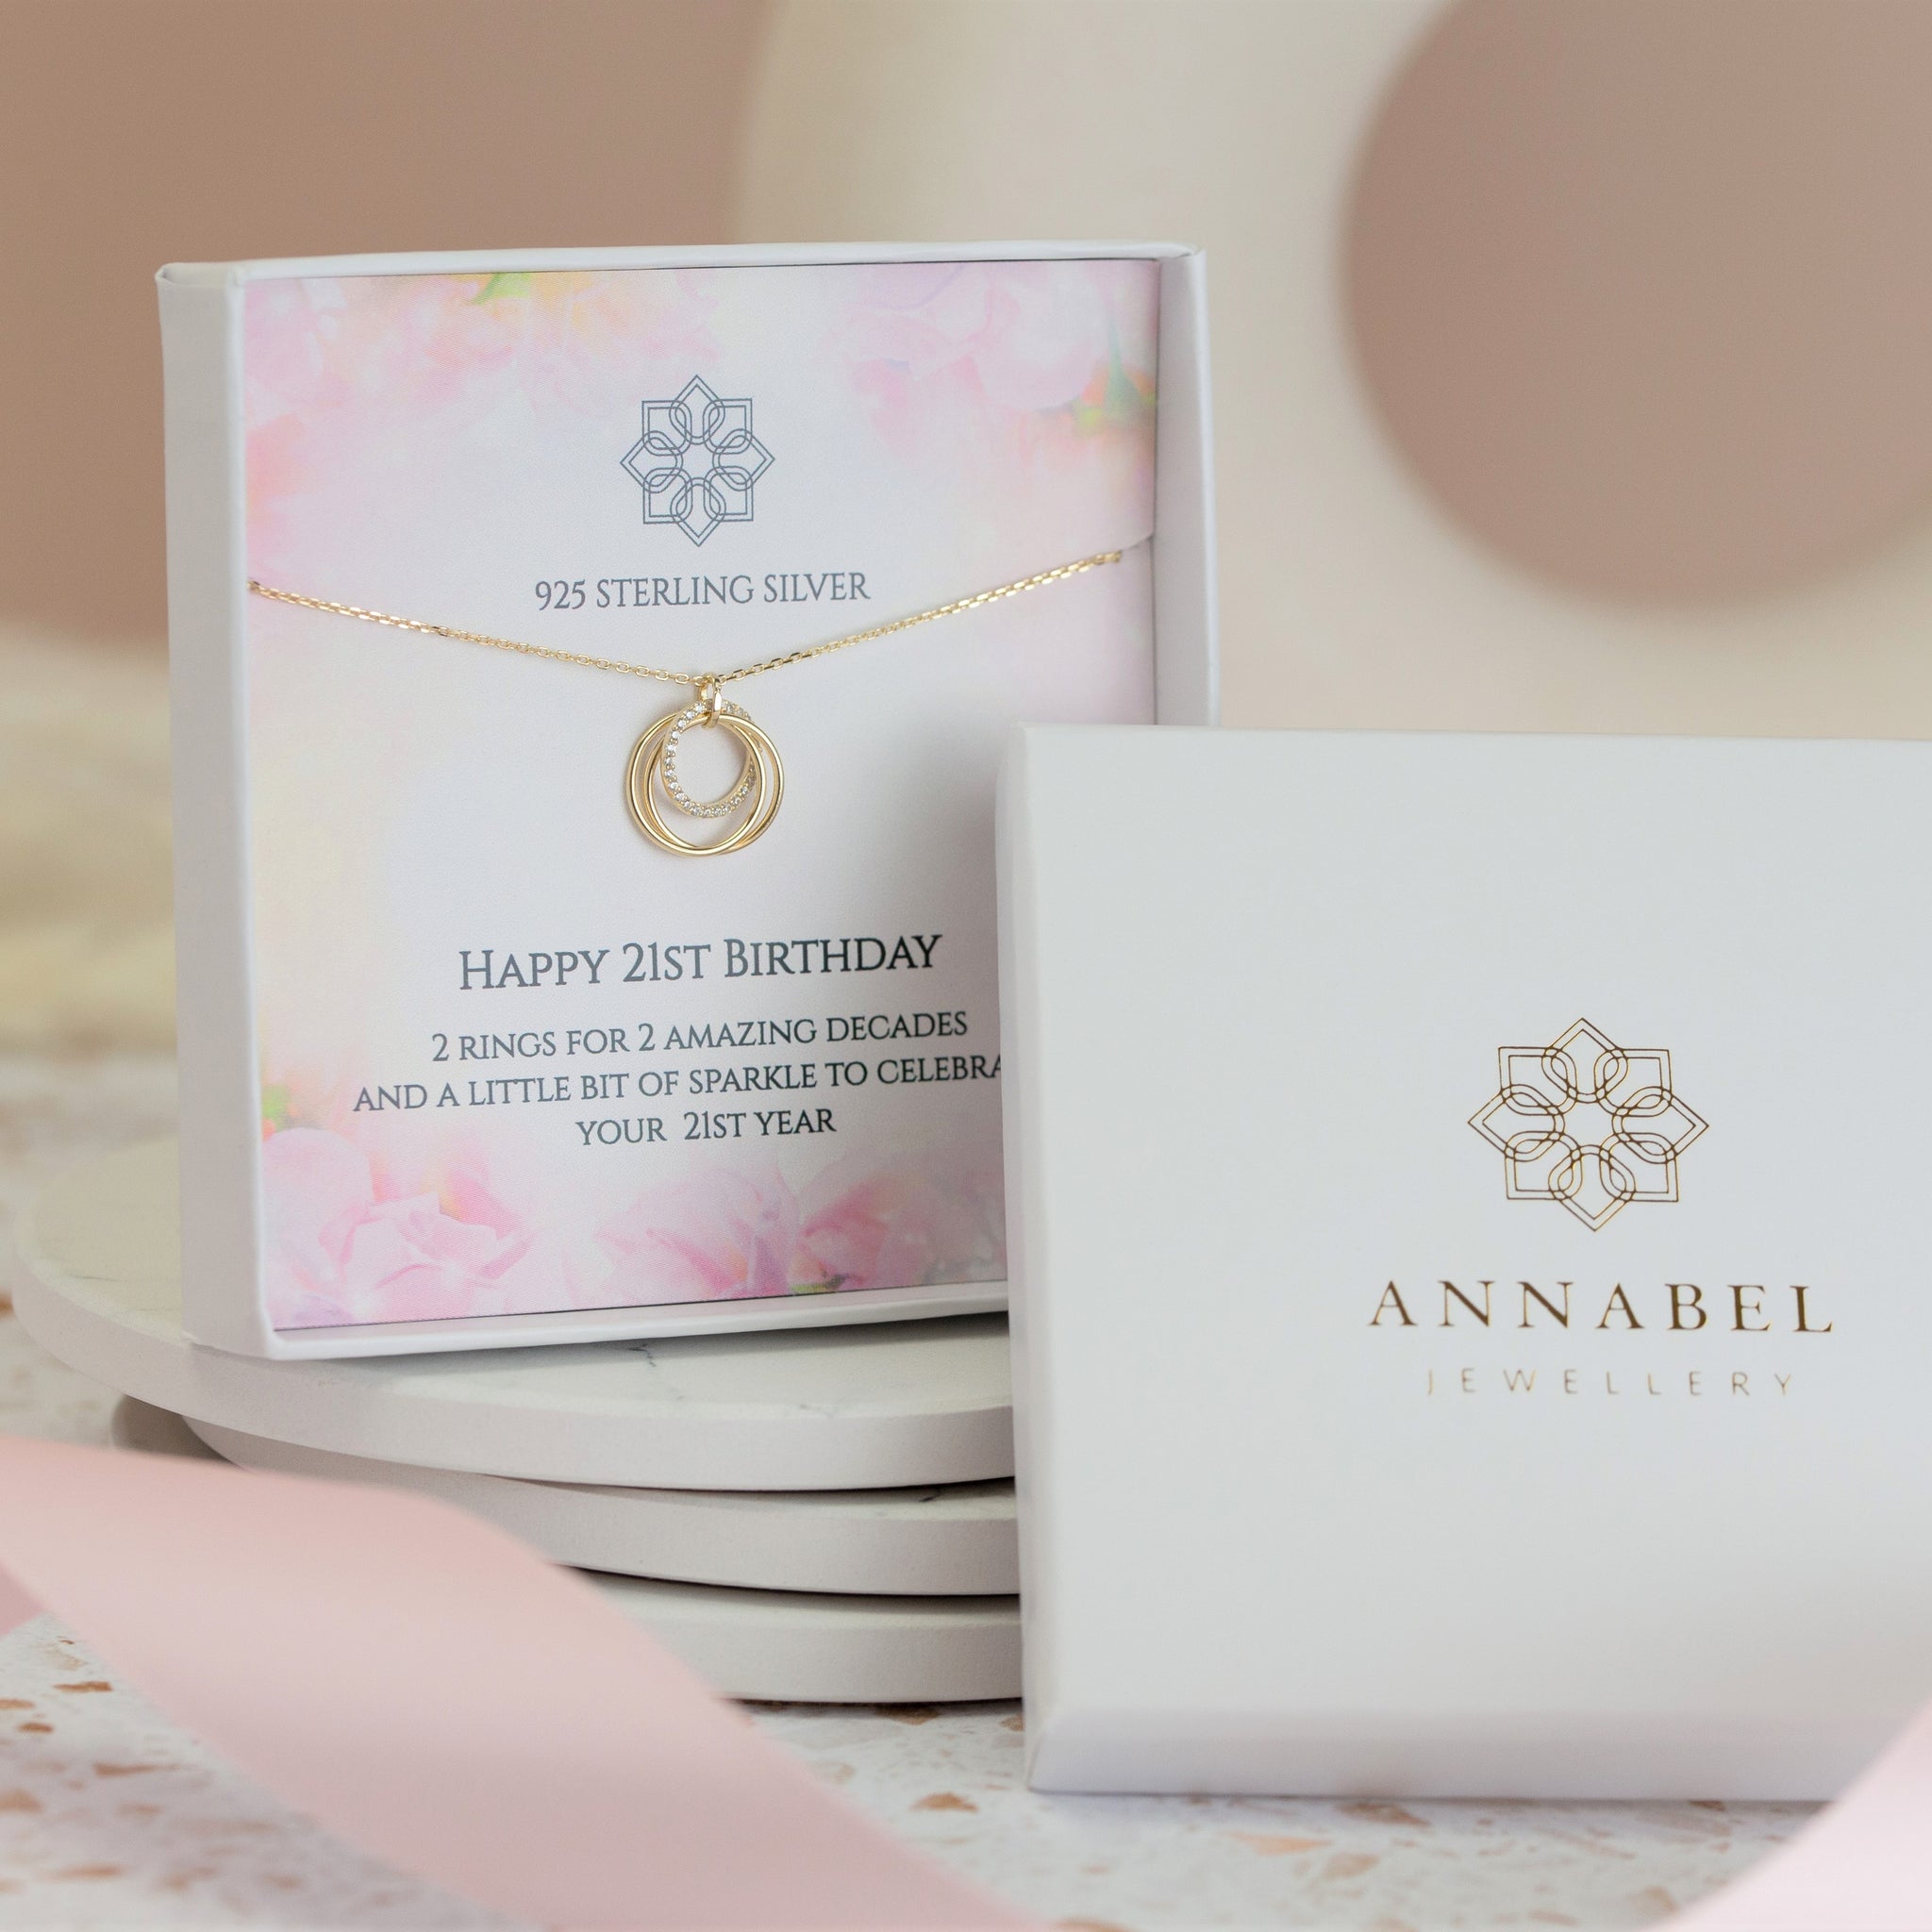 7 Perfect Gifts for her 21st Birthday